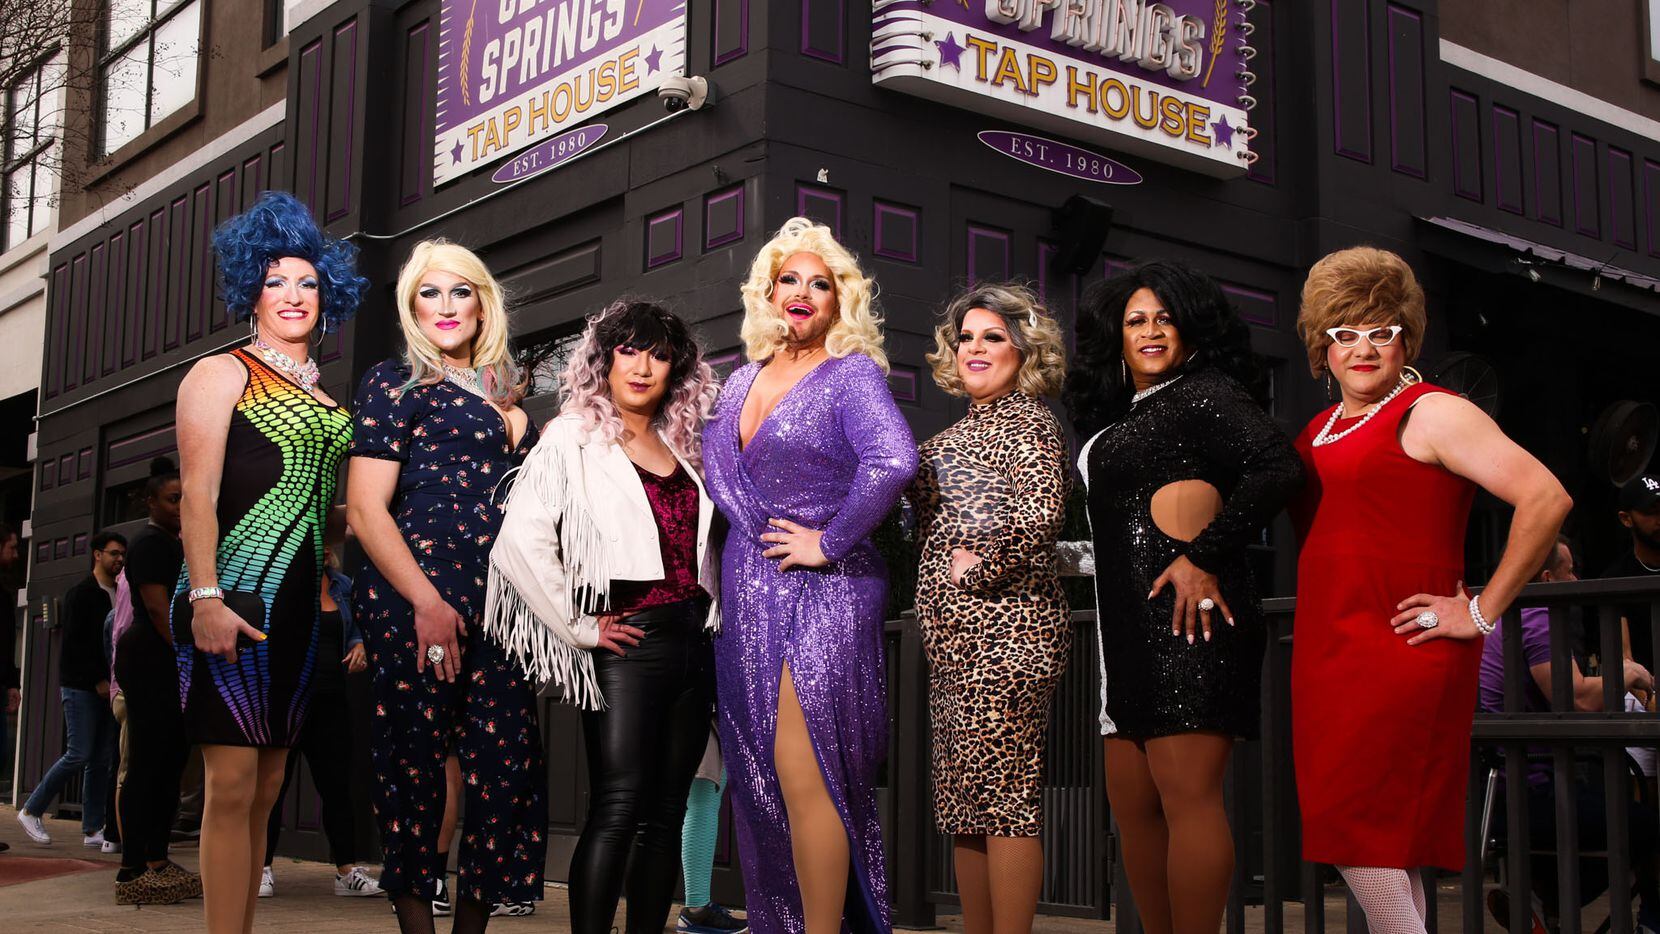 Mack Campbell, aka Marsha Dimes, and his squad of drag performers, Sisters-in-Action,...